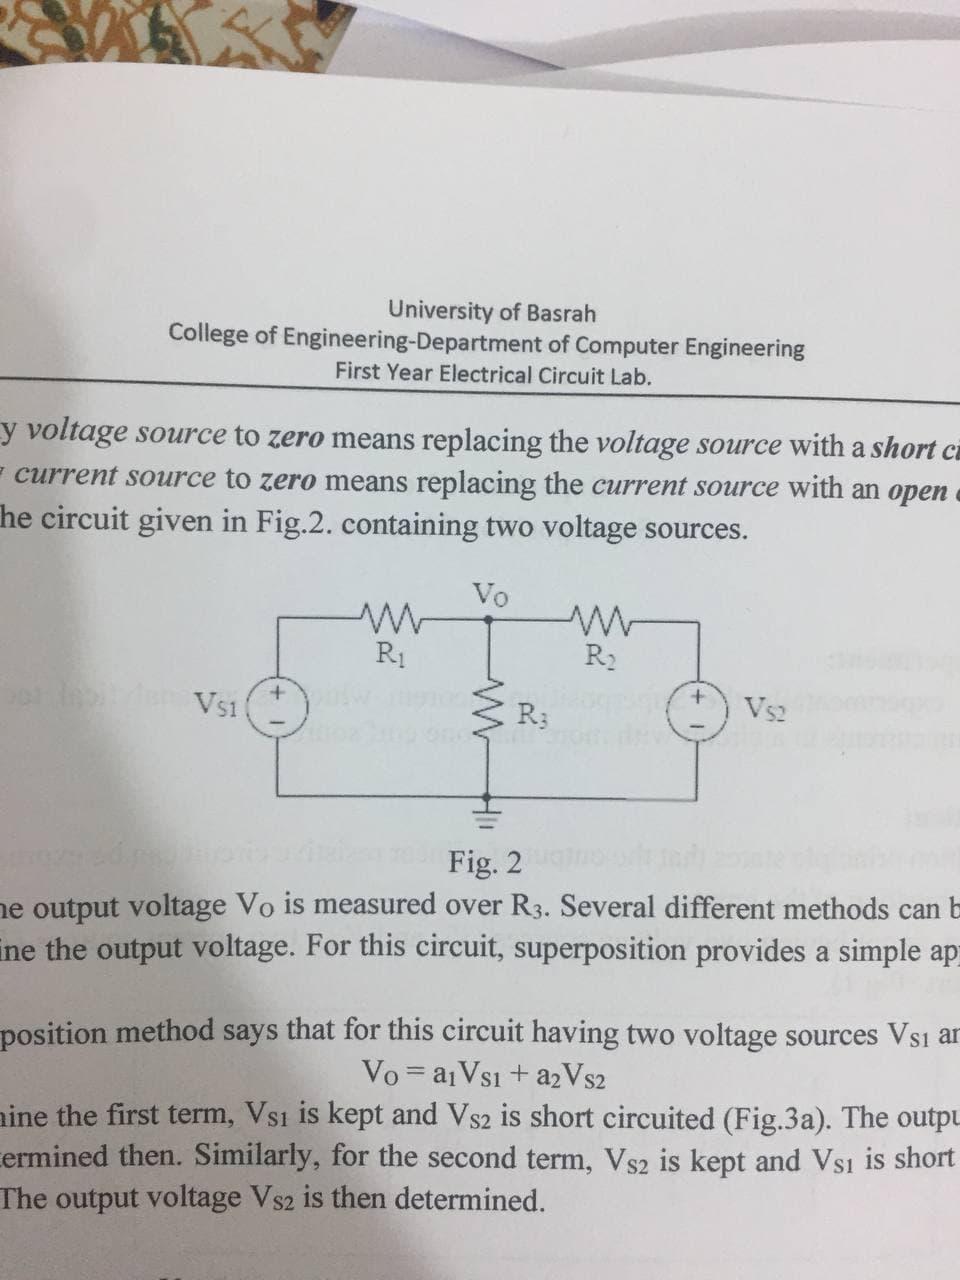 University of Basrah
College of Engineering-Department of Computer Engineering
First Year Electrical Circuit Lab.
y voltage source to zero means replacing the voltage source with a short c
- current source to zero means replacing the current source with an open
he circuit given in Fig.2. containing two voltage sources.
Vo
R1
R2
0 en Vs1
R3
Vs2
Fig. 2
he output voltage Vo is measured over R3. Several different methods can b
ine the output voltage. For this circuit, superposition provides a simple ap
position method says that for this circuit having two voltage sources Vs1 ar
Vo = a1Vsı + a2Vs2
nine the first term, Vs1 is kept and Vs2 is short circuited (Fig.3a). The outpu
cermined then. Similarly, for the second term, Vs2 is kept and Vsi is short
The output voltage Vs2 is then determined.
